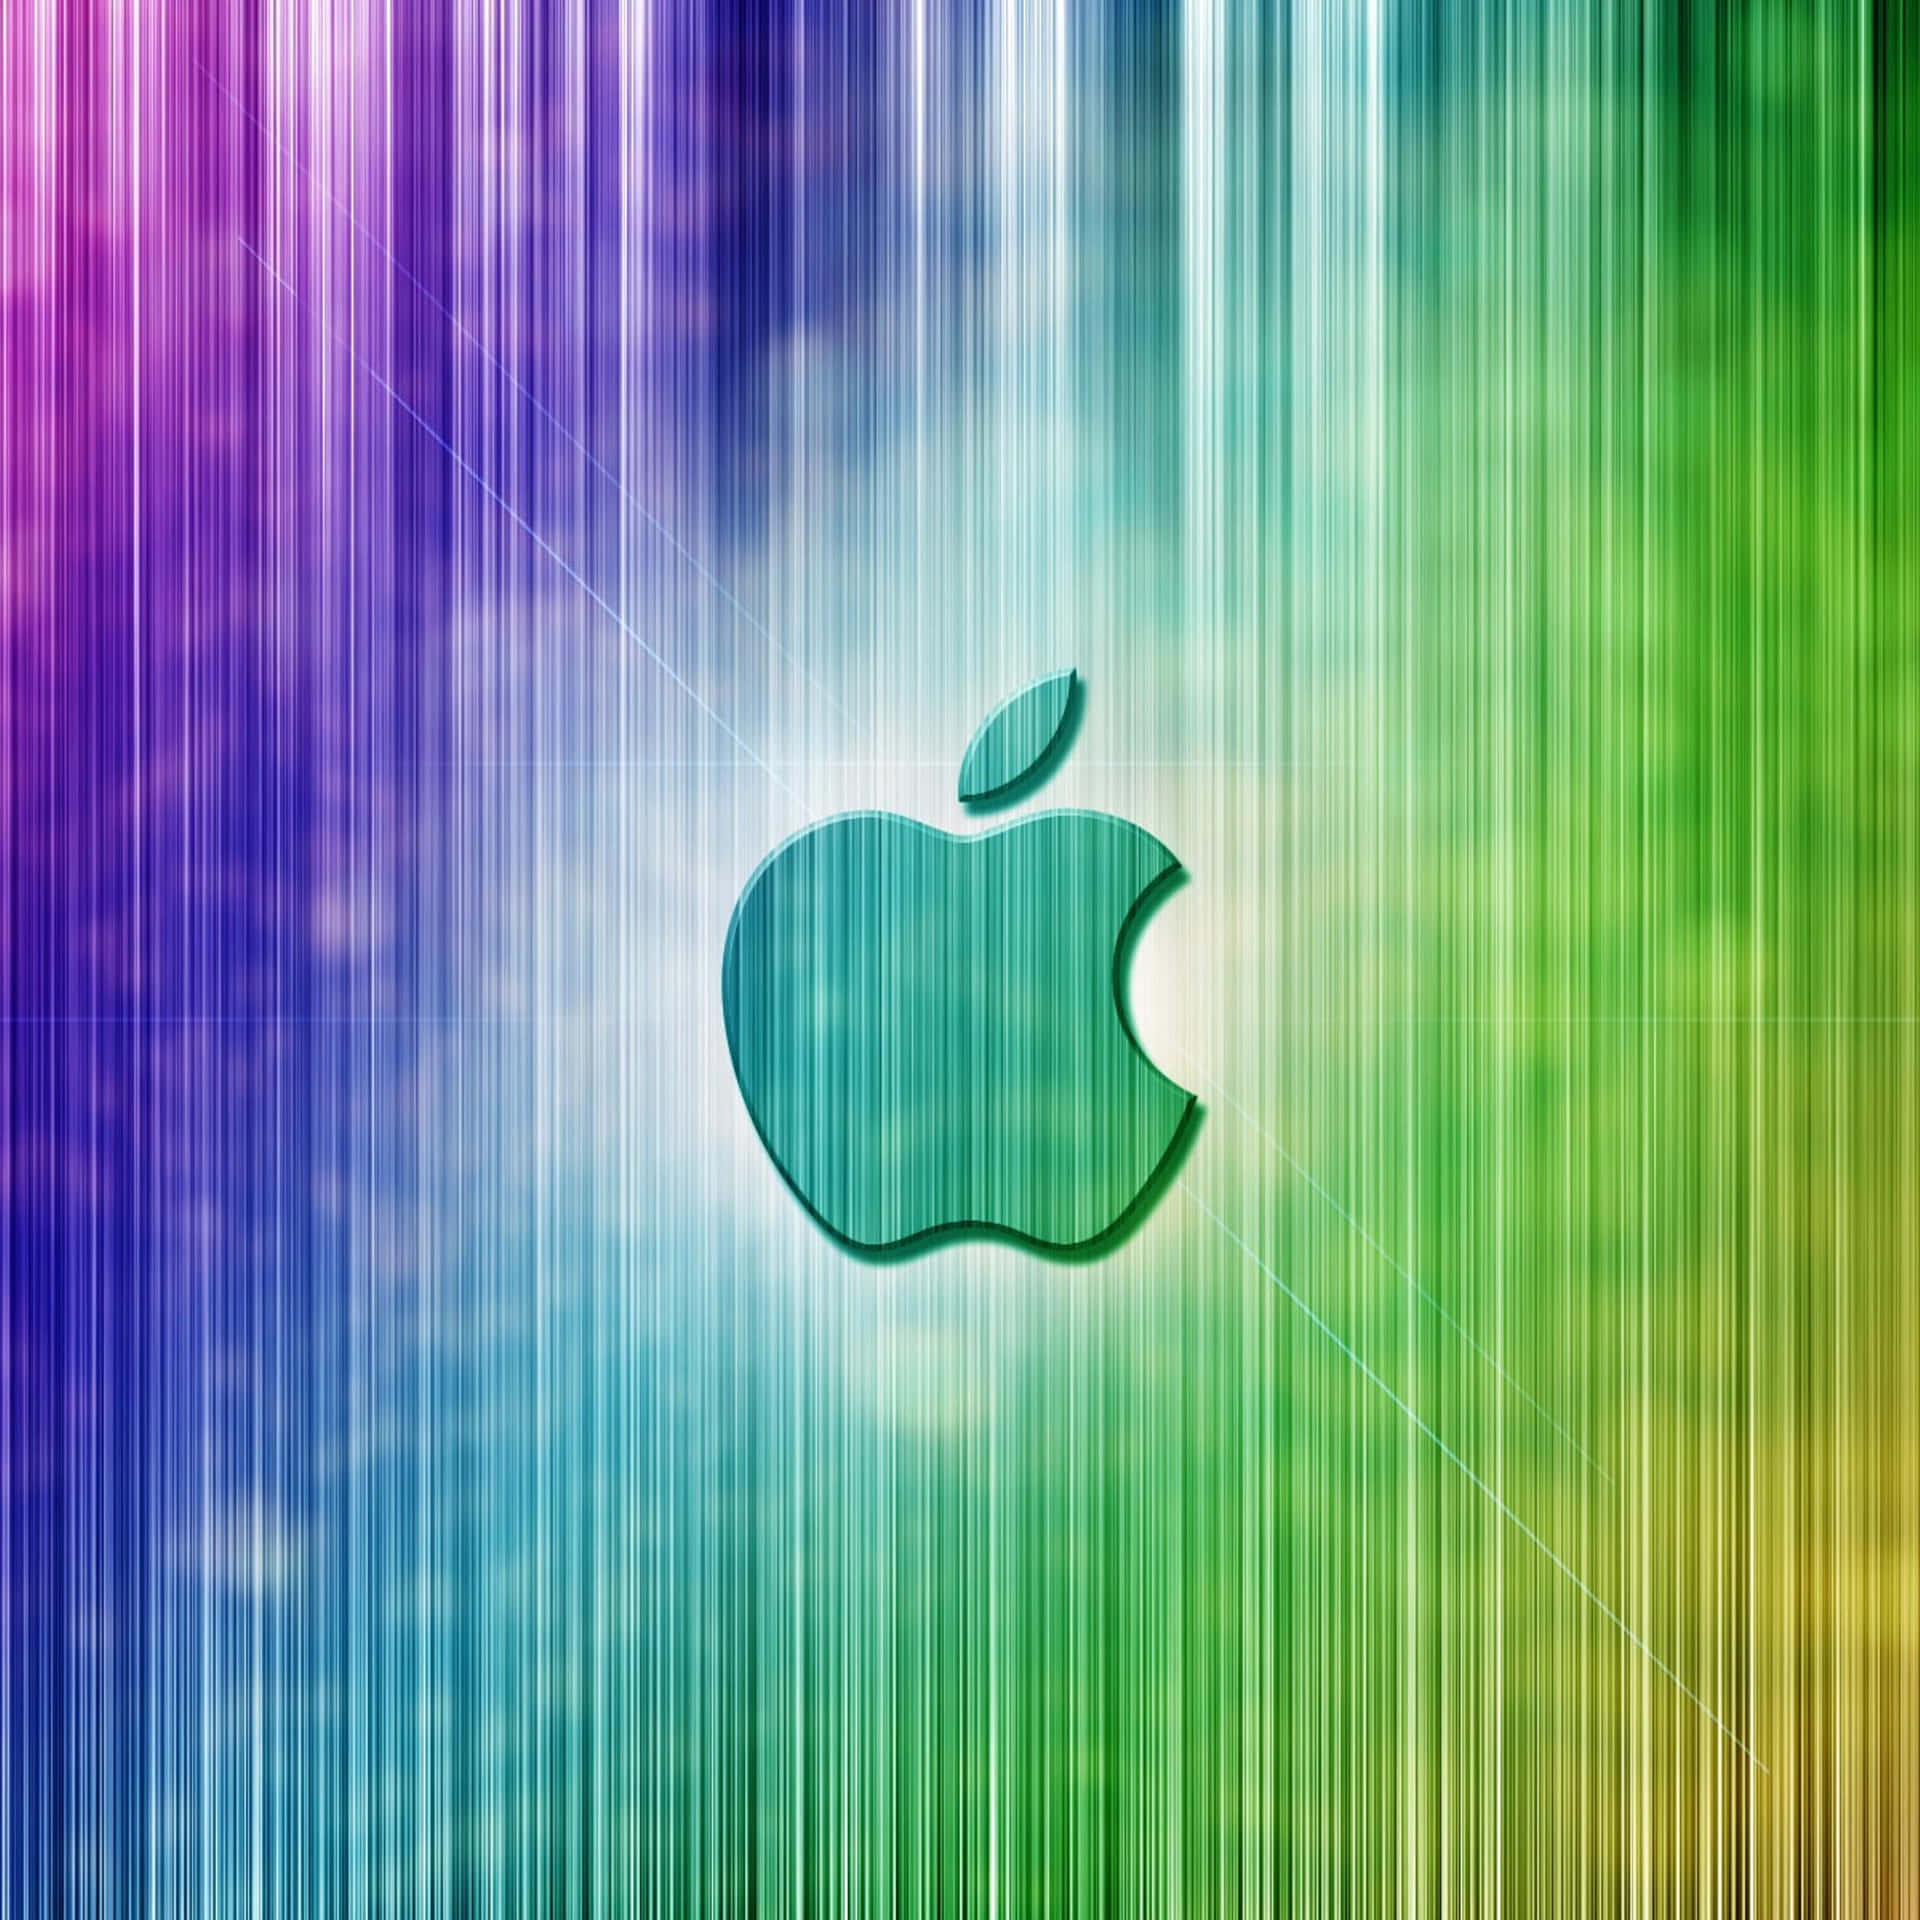 Apple Logo on Abstract Blue Backdrop